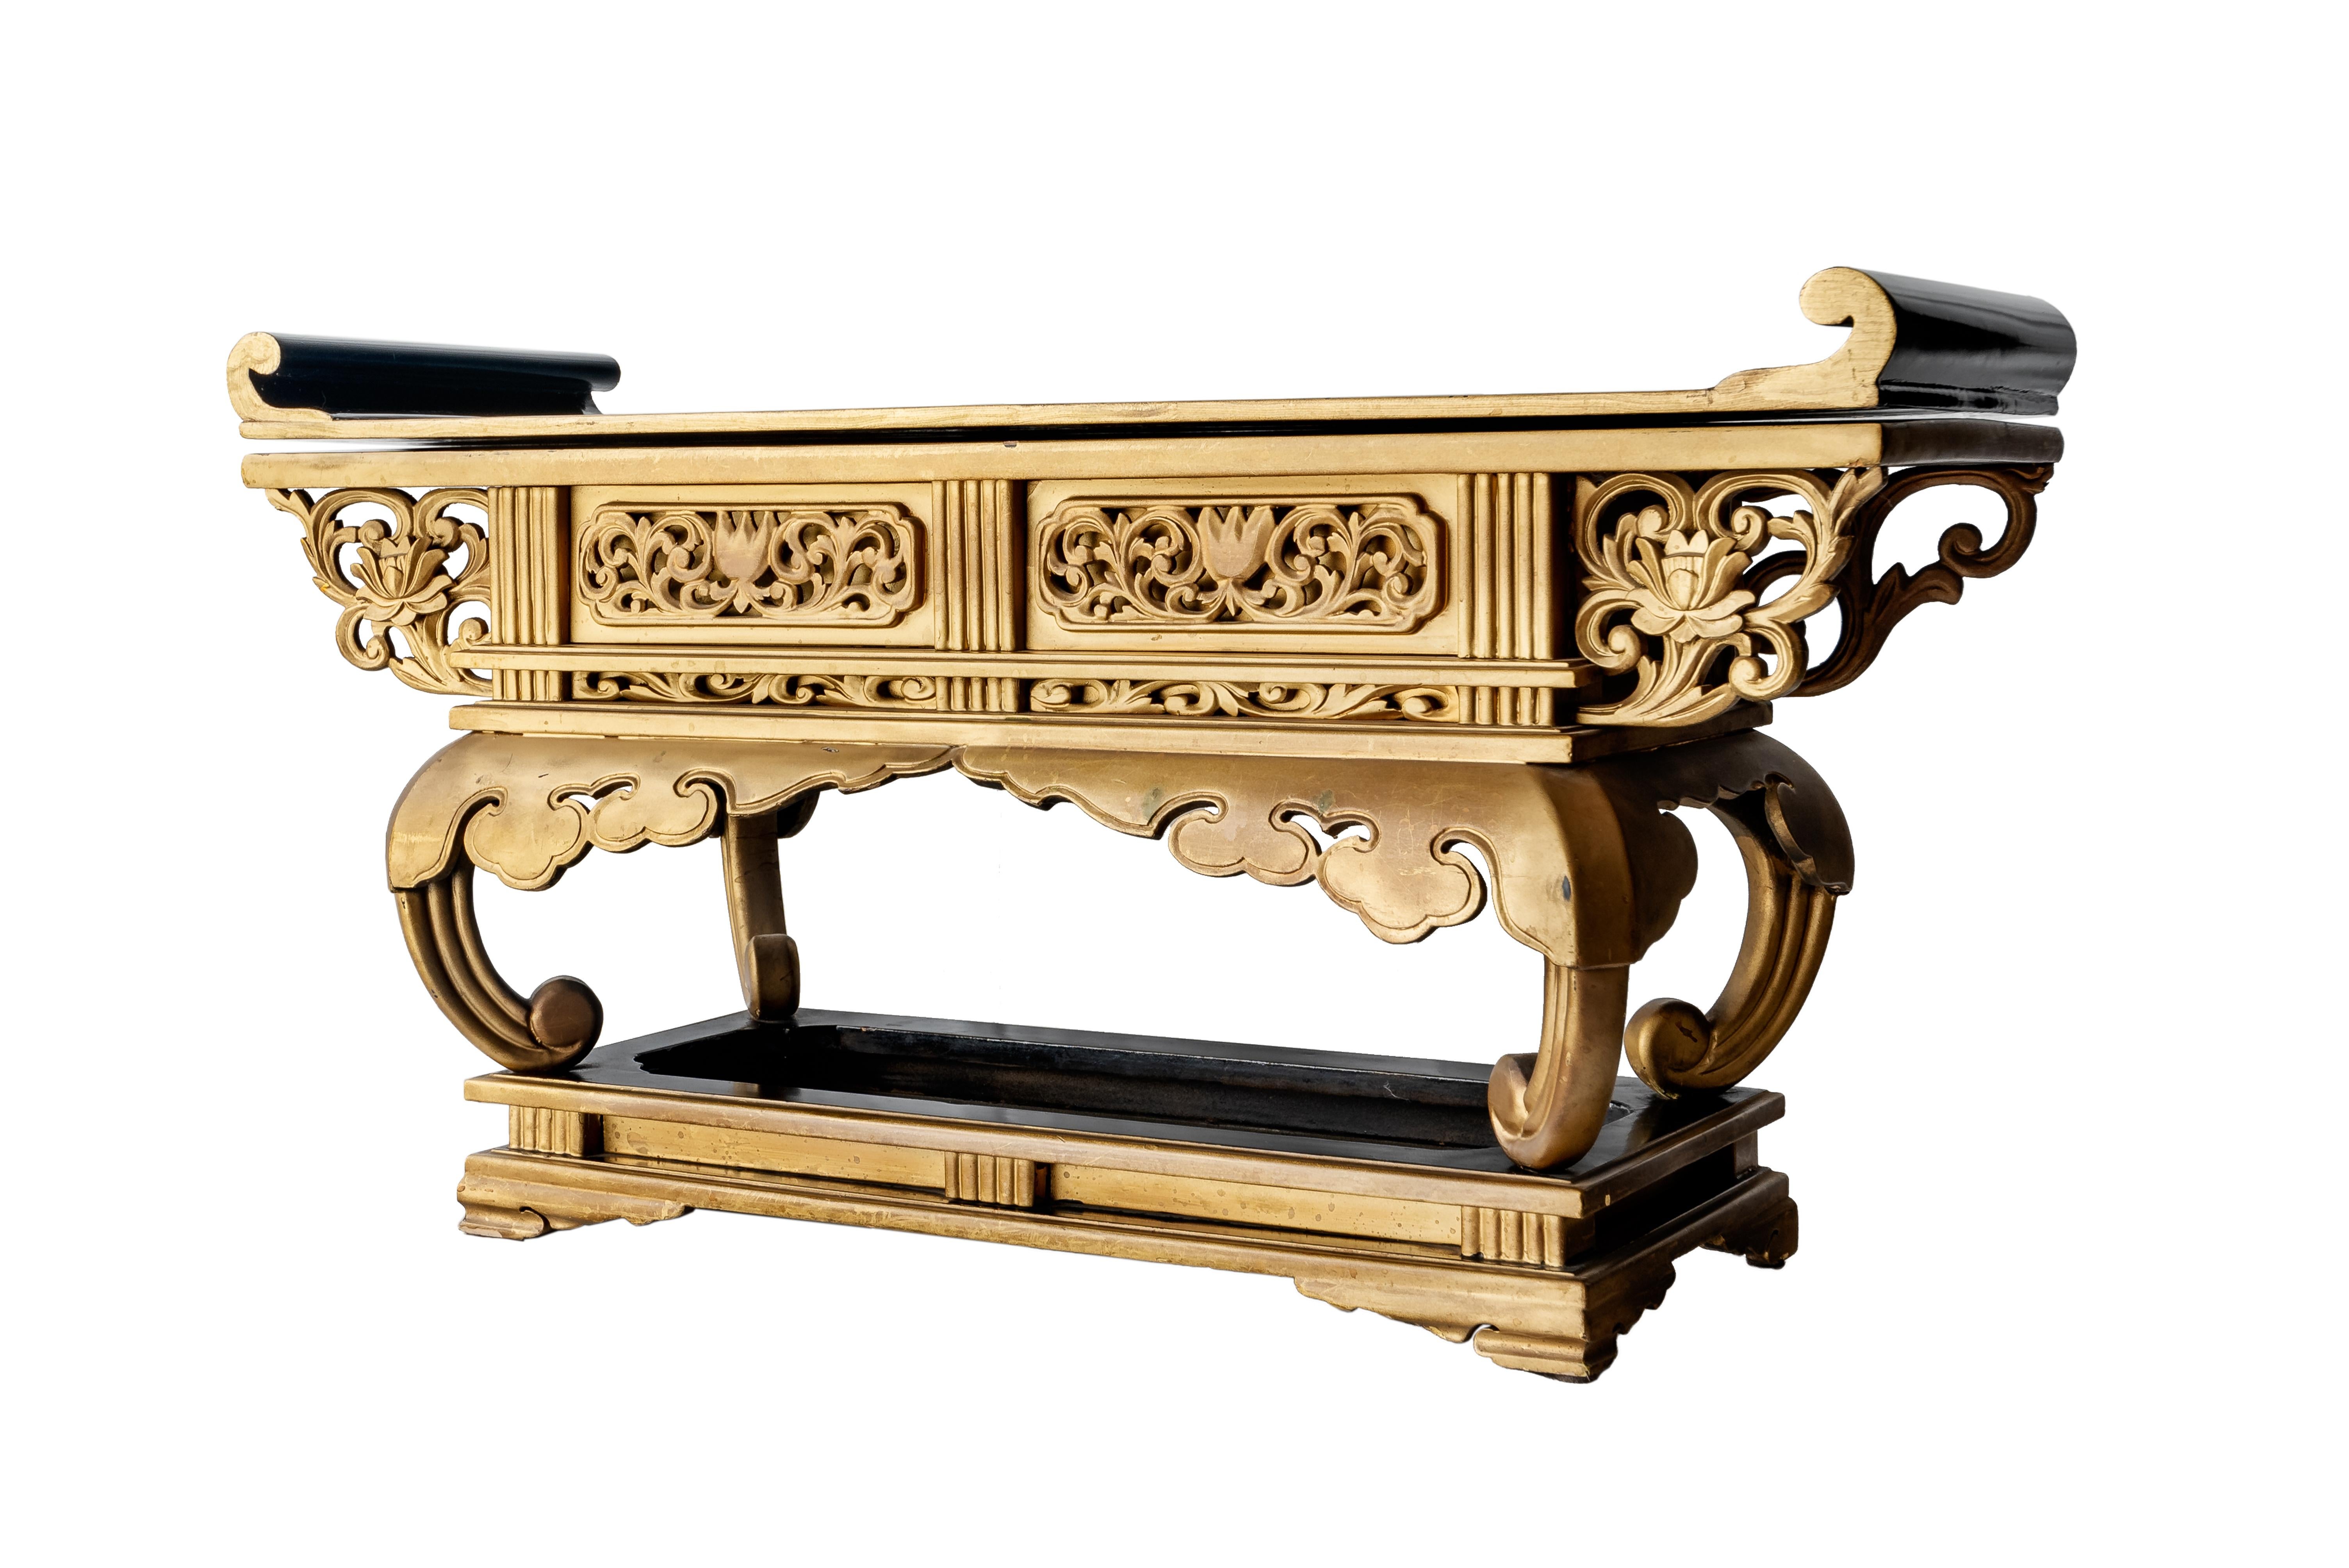 20th Century Meiji Style Japanese Altar Shrine, Butsudan, Gold and Black Lacquered Wood